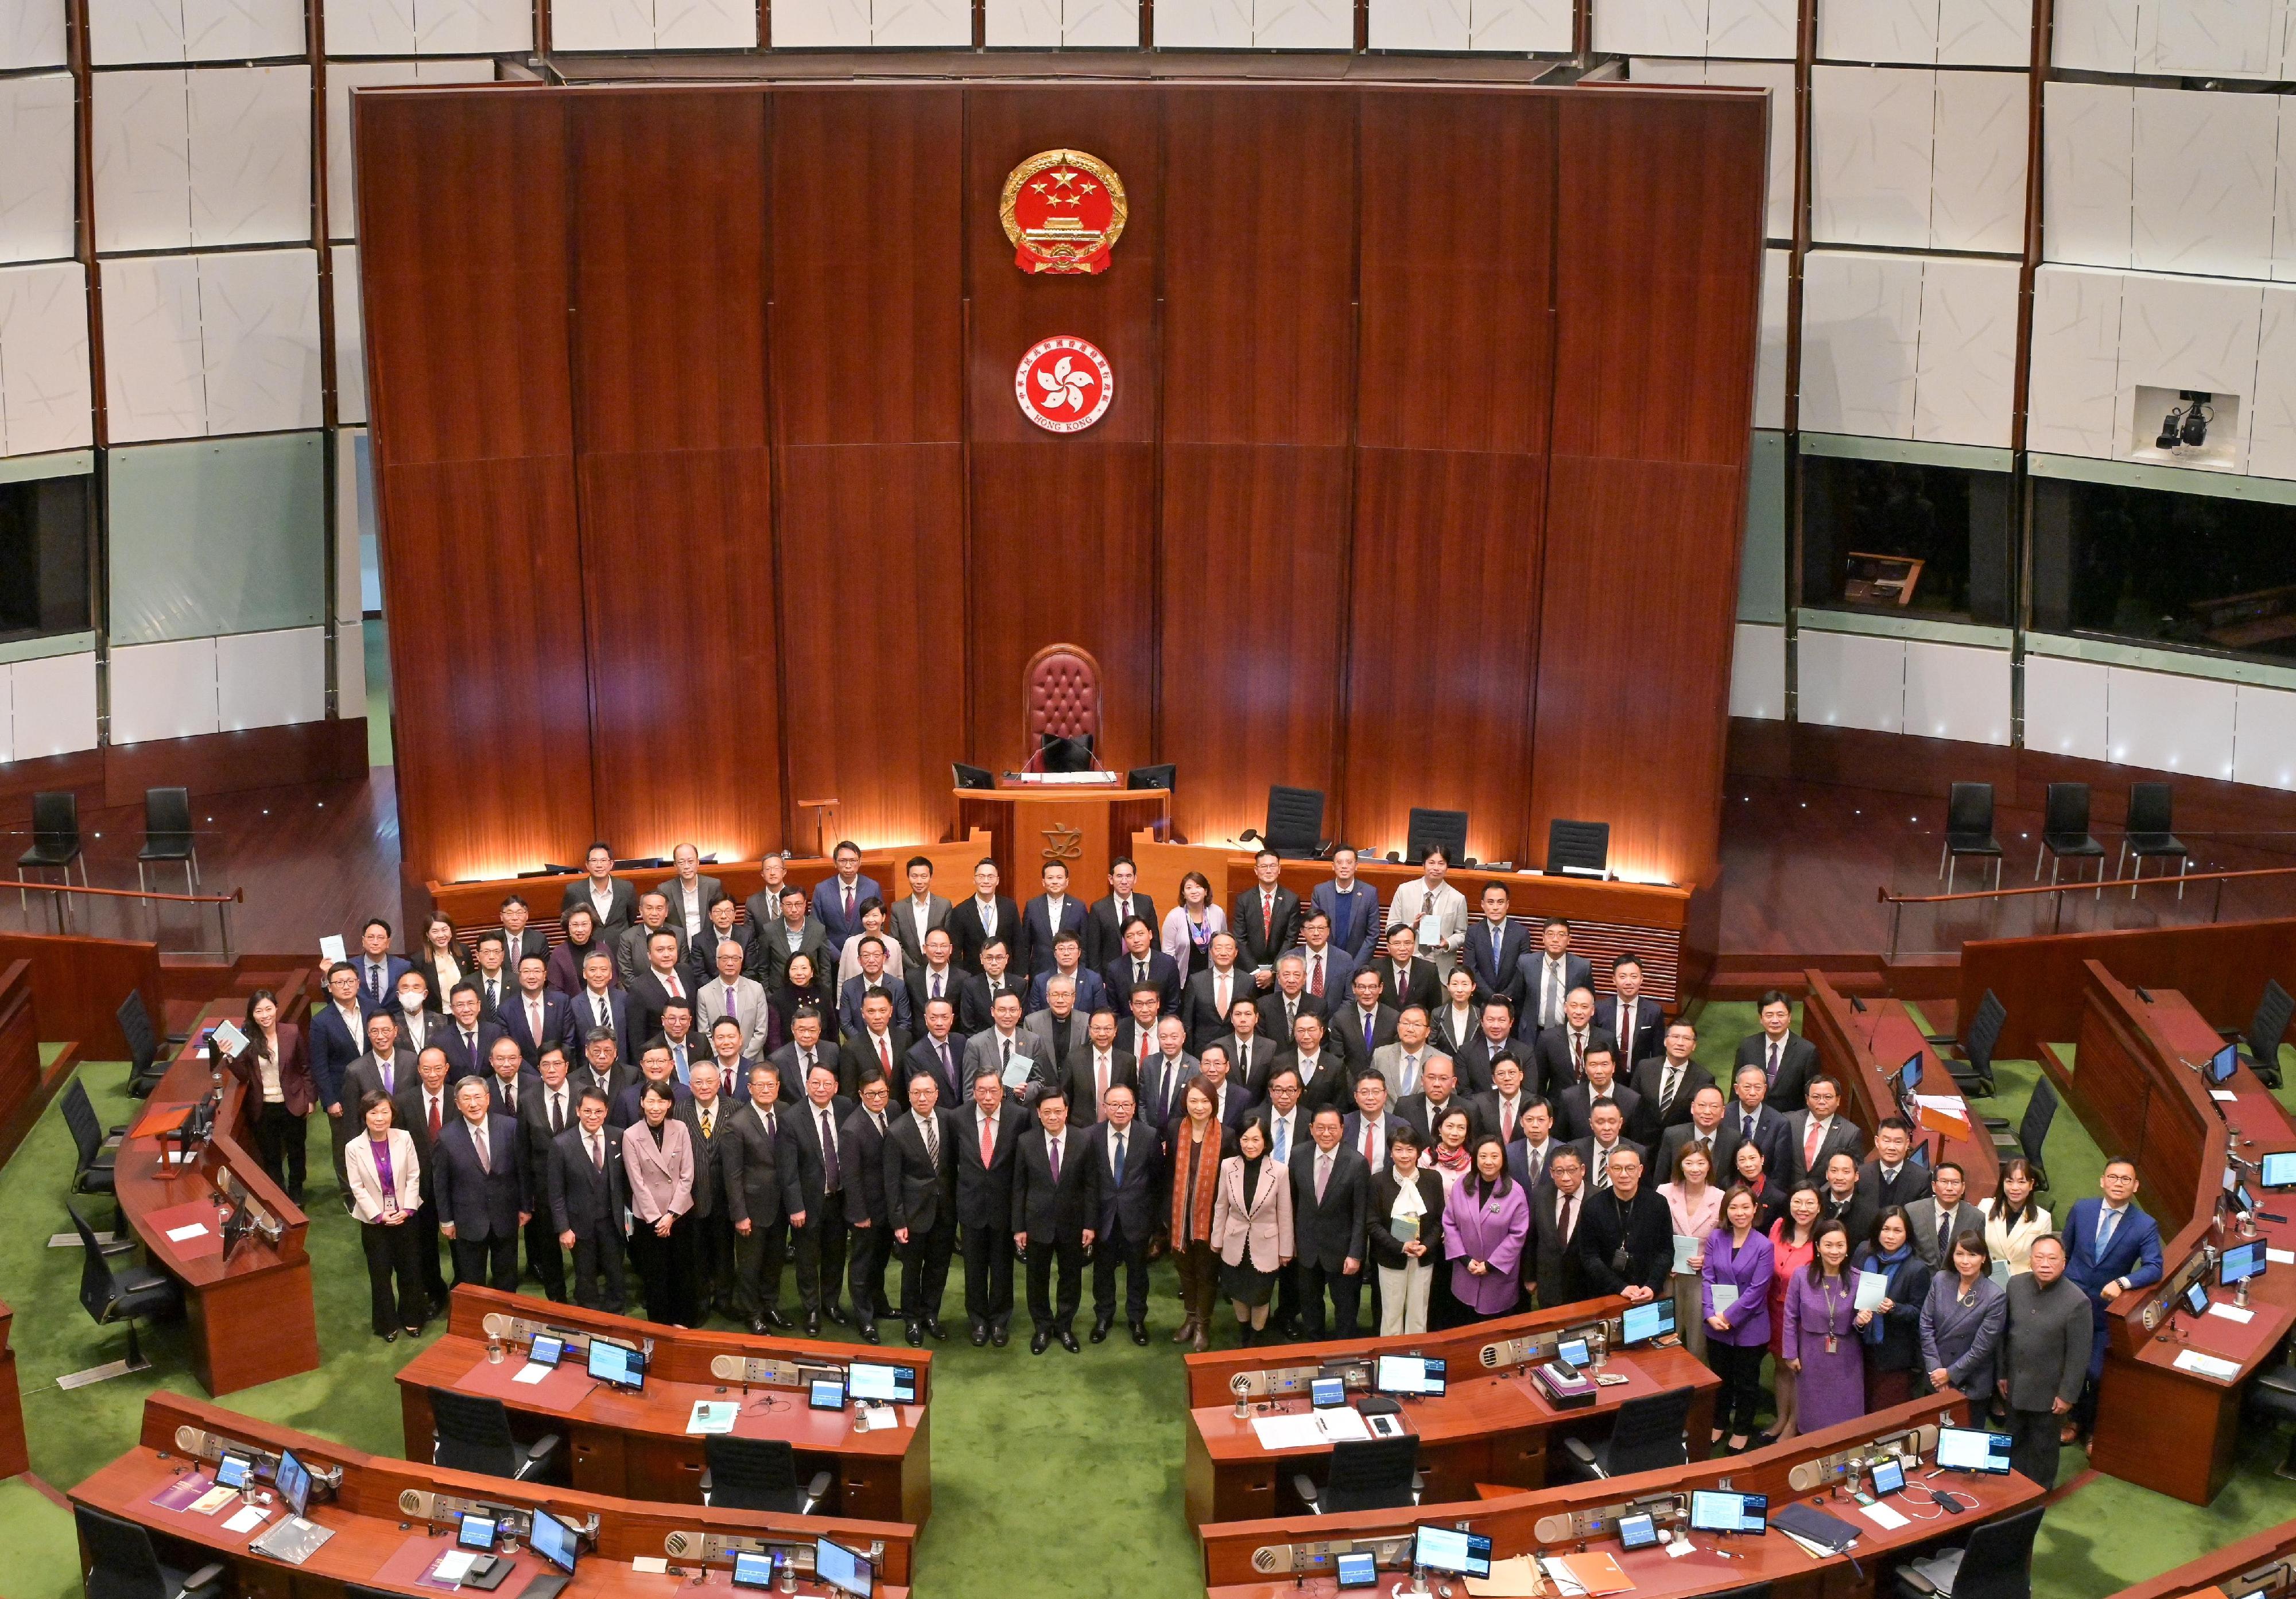 The Chief Executive, Mr John Lee, addresses at the Legislative Council (LegCo) meeting on the LegCo's passage of the Safeguarding National Security Bill today (March 19). Photo shows Mr Lee (first row, ninth left) with Chief Secretary for Administration, Mr Chan Kwok-ki (first row, fifth left); the Financial Secretary, Mr Paul Chan (first row, fourth left); the Secretary for Justice, Mr Paul Lam, SC (first row, seventh left); and the Secretary for Security, Mr Tang Ping-keung (first row, sixth left); the President of the Legislative Council, Mr Andrew Leung (first row, eighth left) and Members of the LegCo at the Chamber after addressing to LegCo.